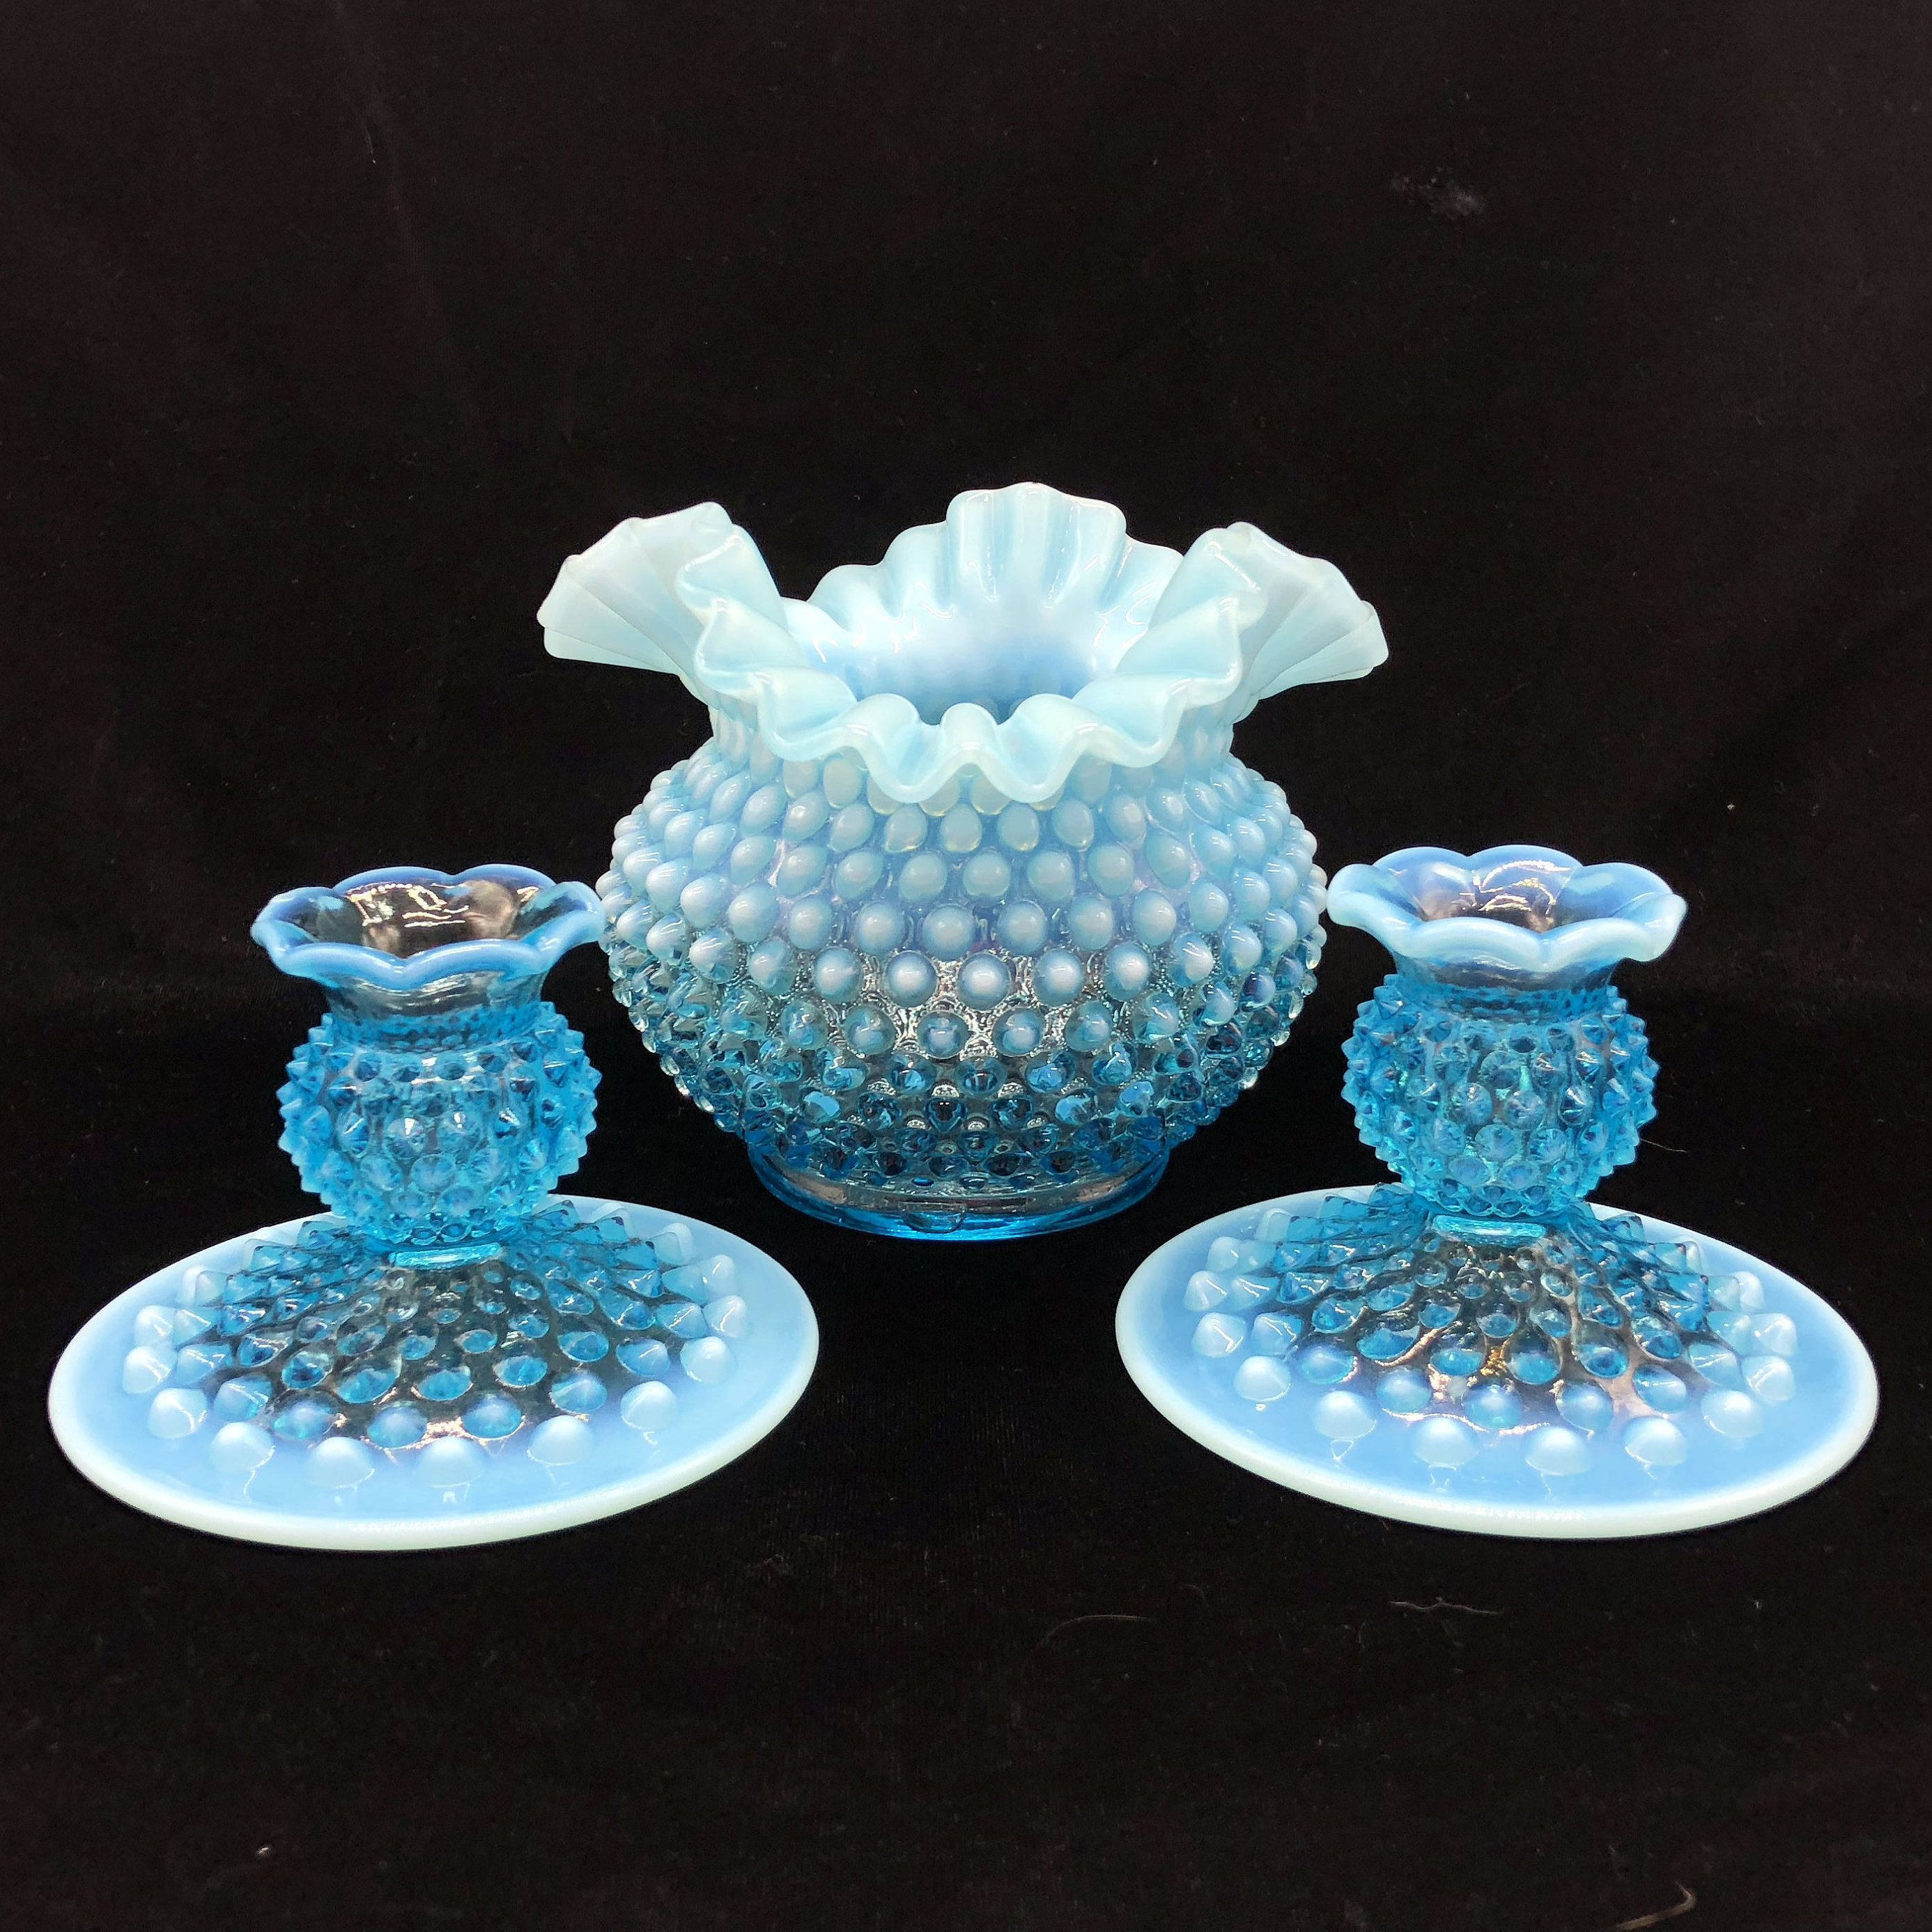 30 Elegant Fenton Glass Small Vase 2024 free download fenton glass small vase of 37 fenton blue glass vase the weekly world with fenton hobnail glass centerpiece set blue opalescent vase candle